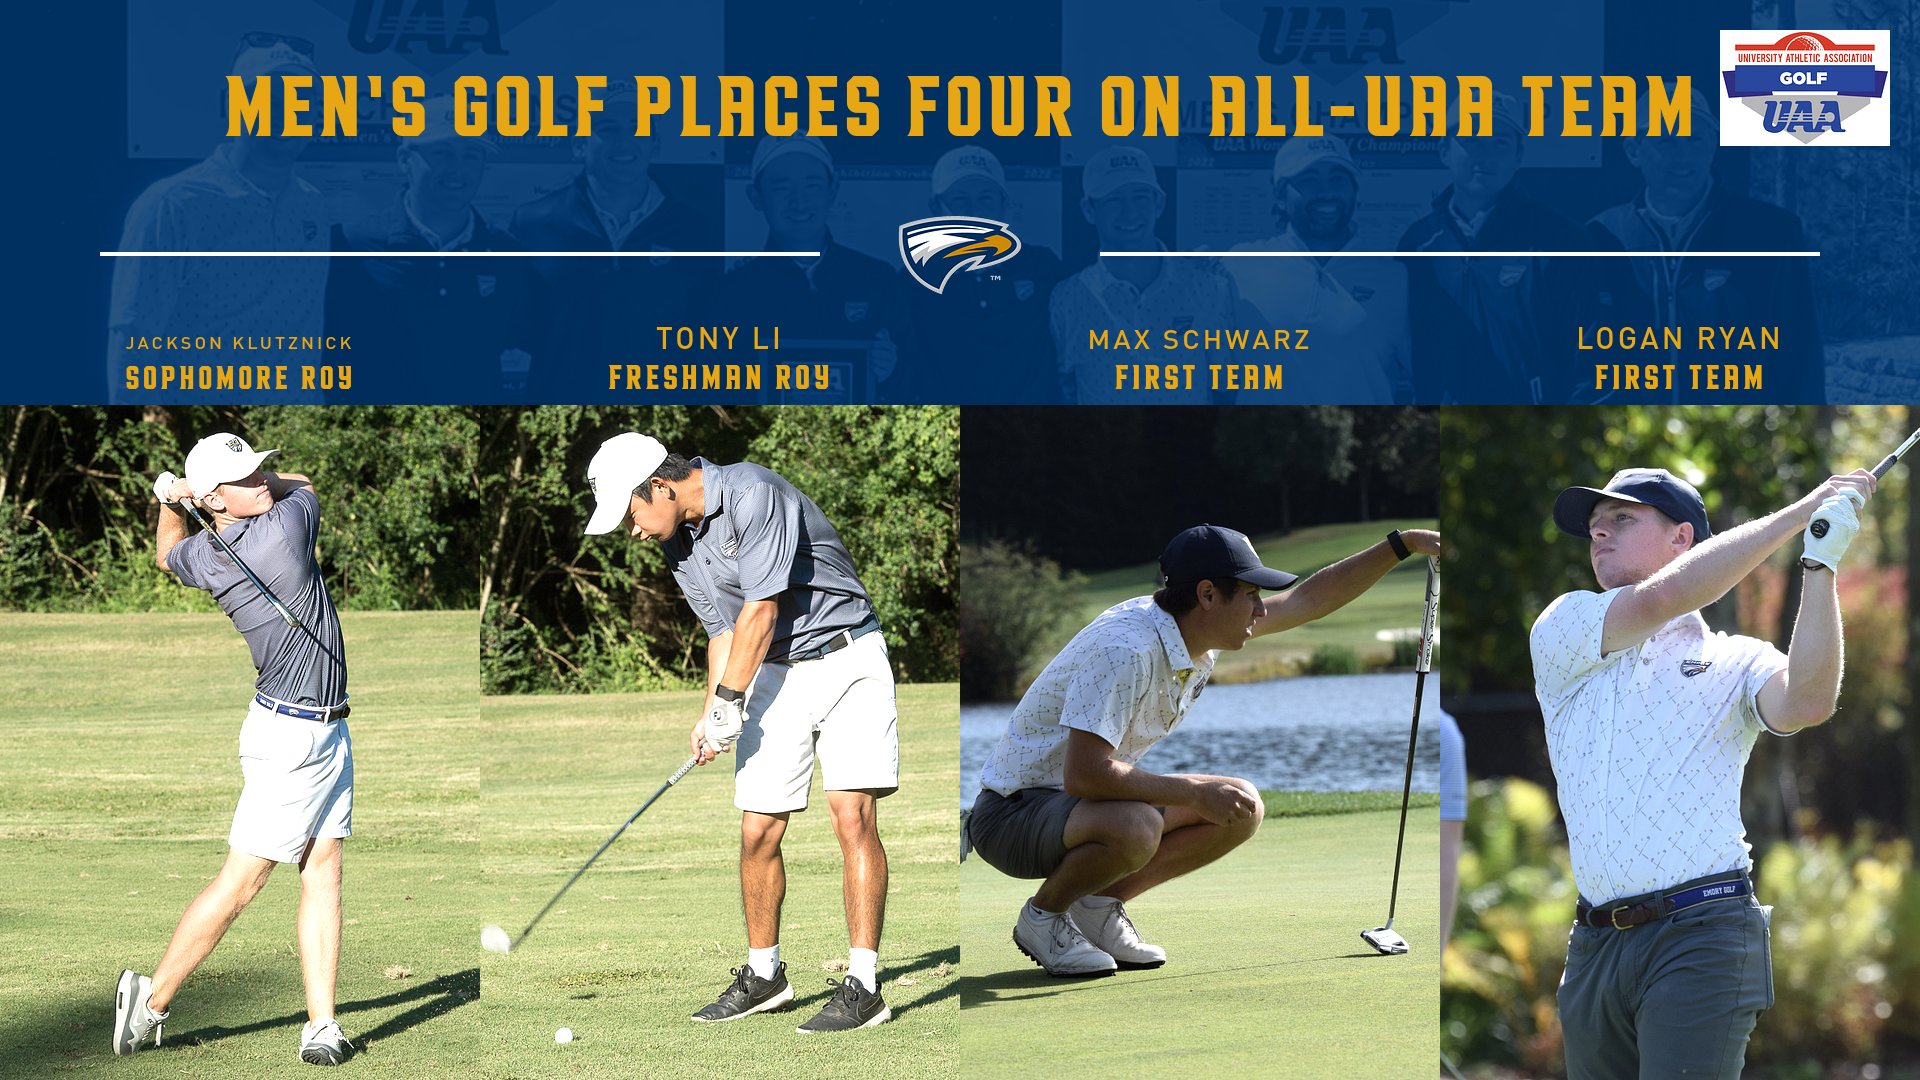 Men's Golf Places Four on All-UAA Team; Klutznick & Li Sweep Rookie of the Year Awards